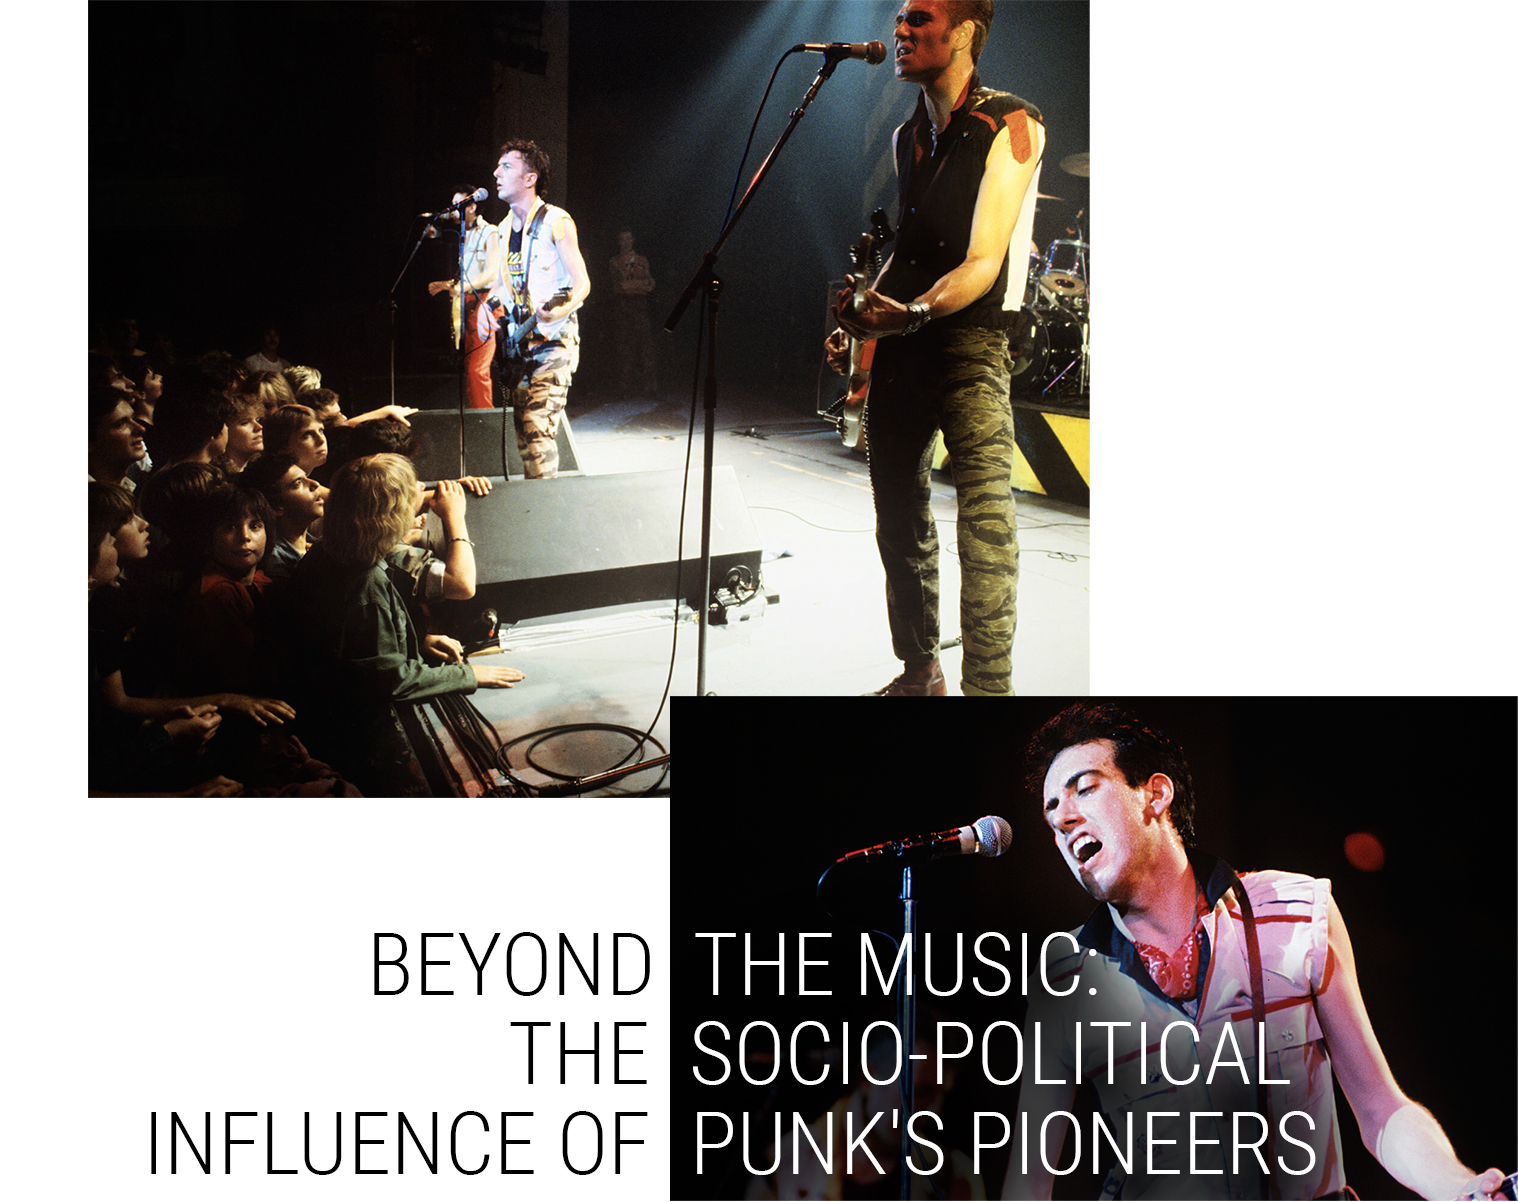 Beyond-the-Music-The-SocioPolitical-Influence-of-Punks-Pioneers_header3.jpg